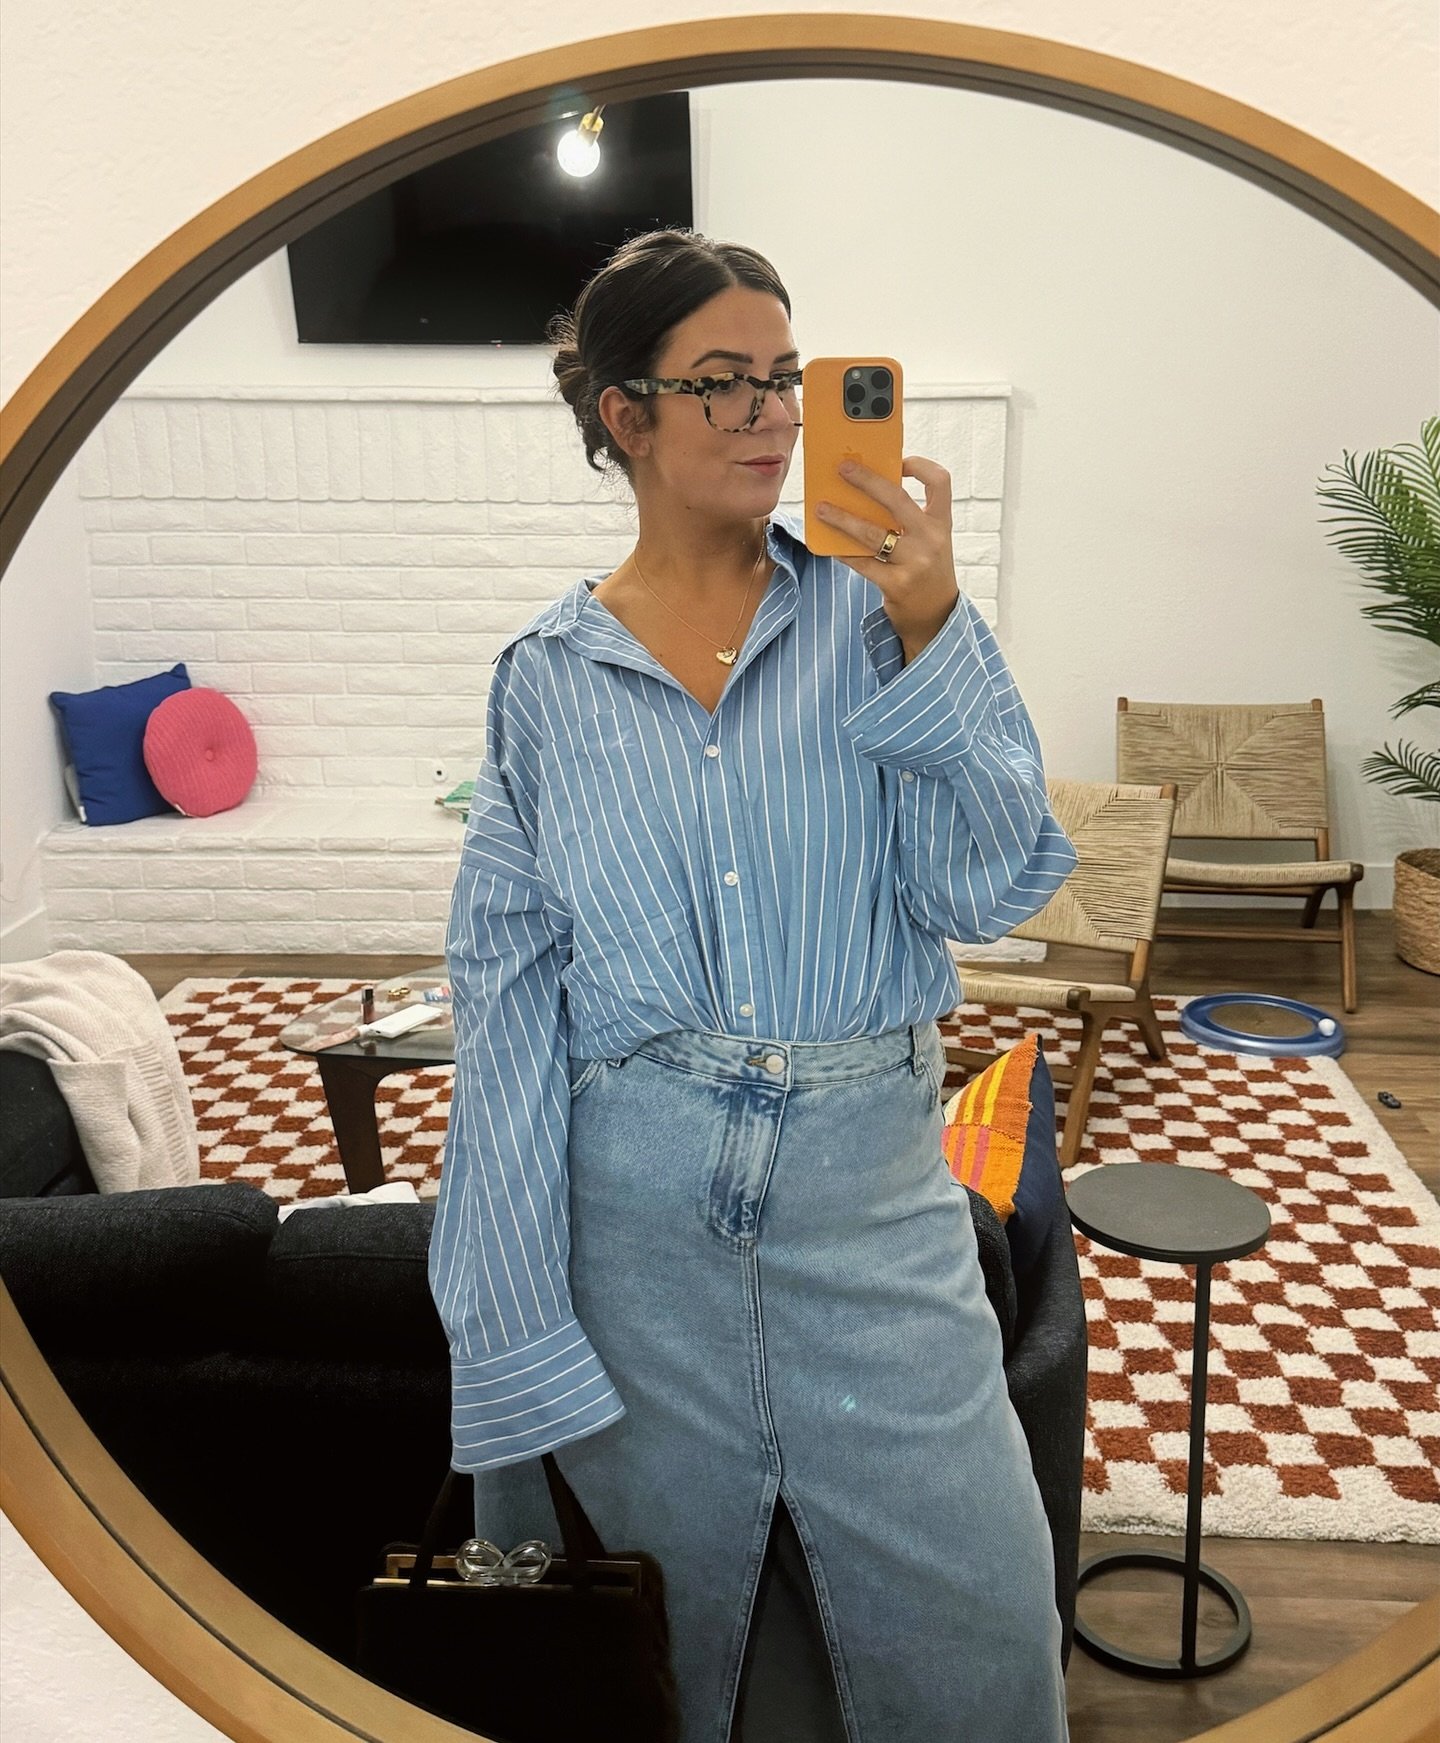 current adhd fixation: oversized striped button ups. still haven&rsquo;t found a white linen one I love though, once I do I&rsquo;m sure that will be the next fixation&hellip; any recs?